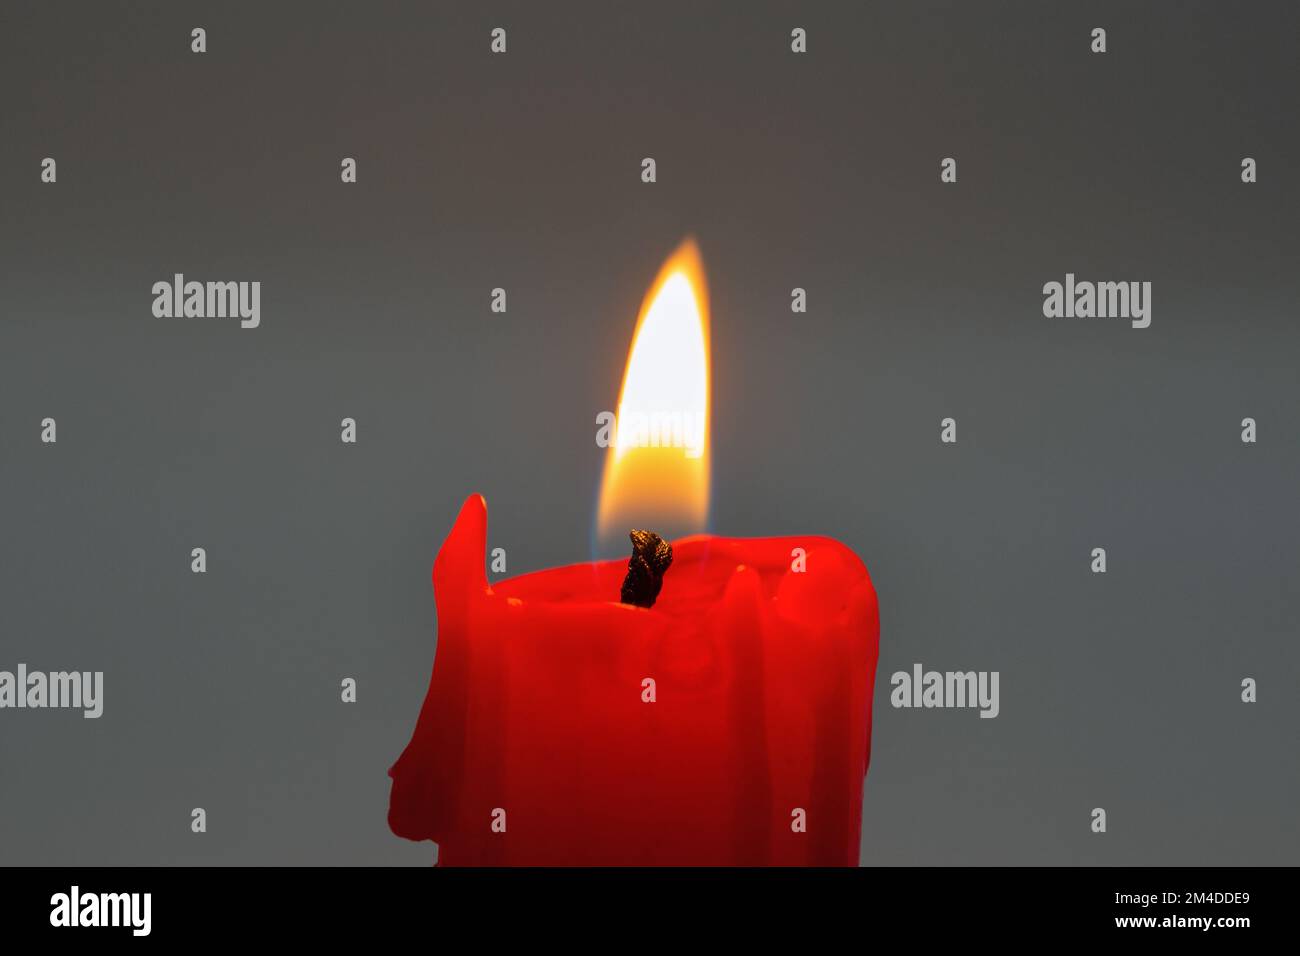 burning small red candle stub closeup on dark background Stock Photo